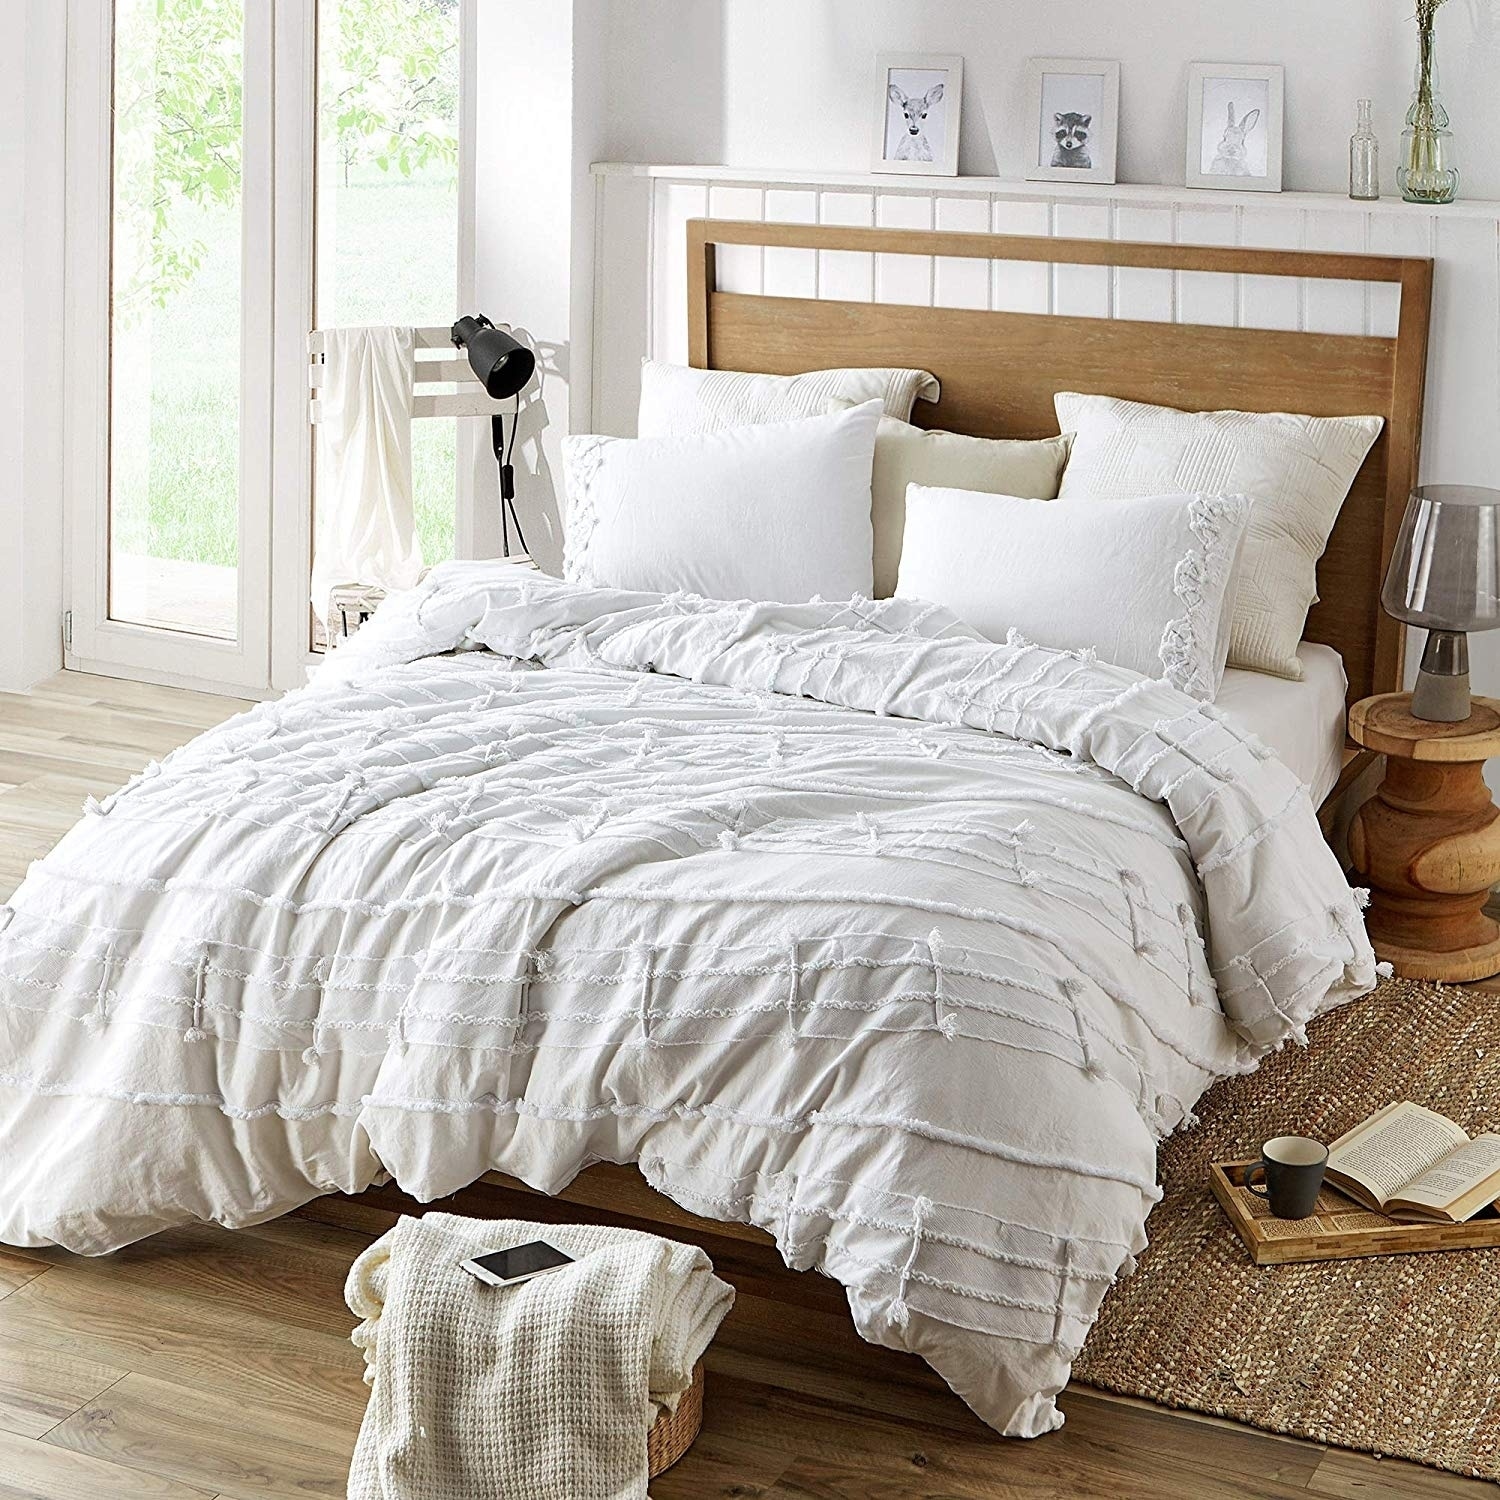 Twin XL Size Textured Duvet Covers and Sets - Bed Bath & Beyond